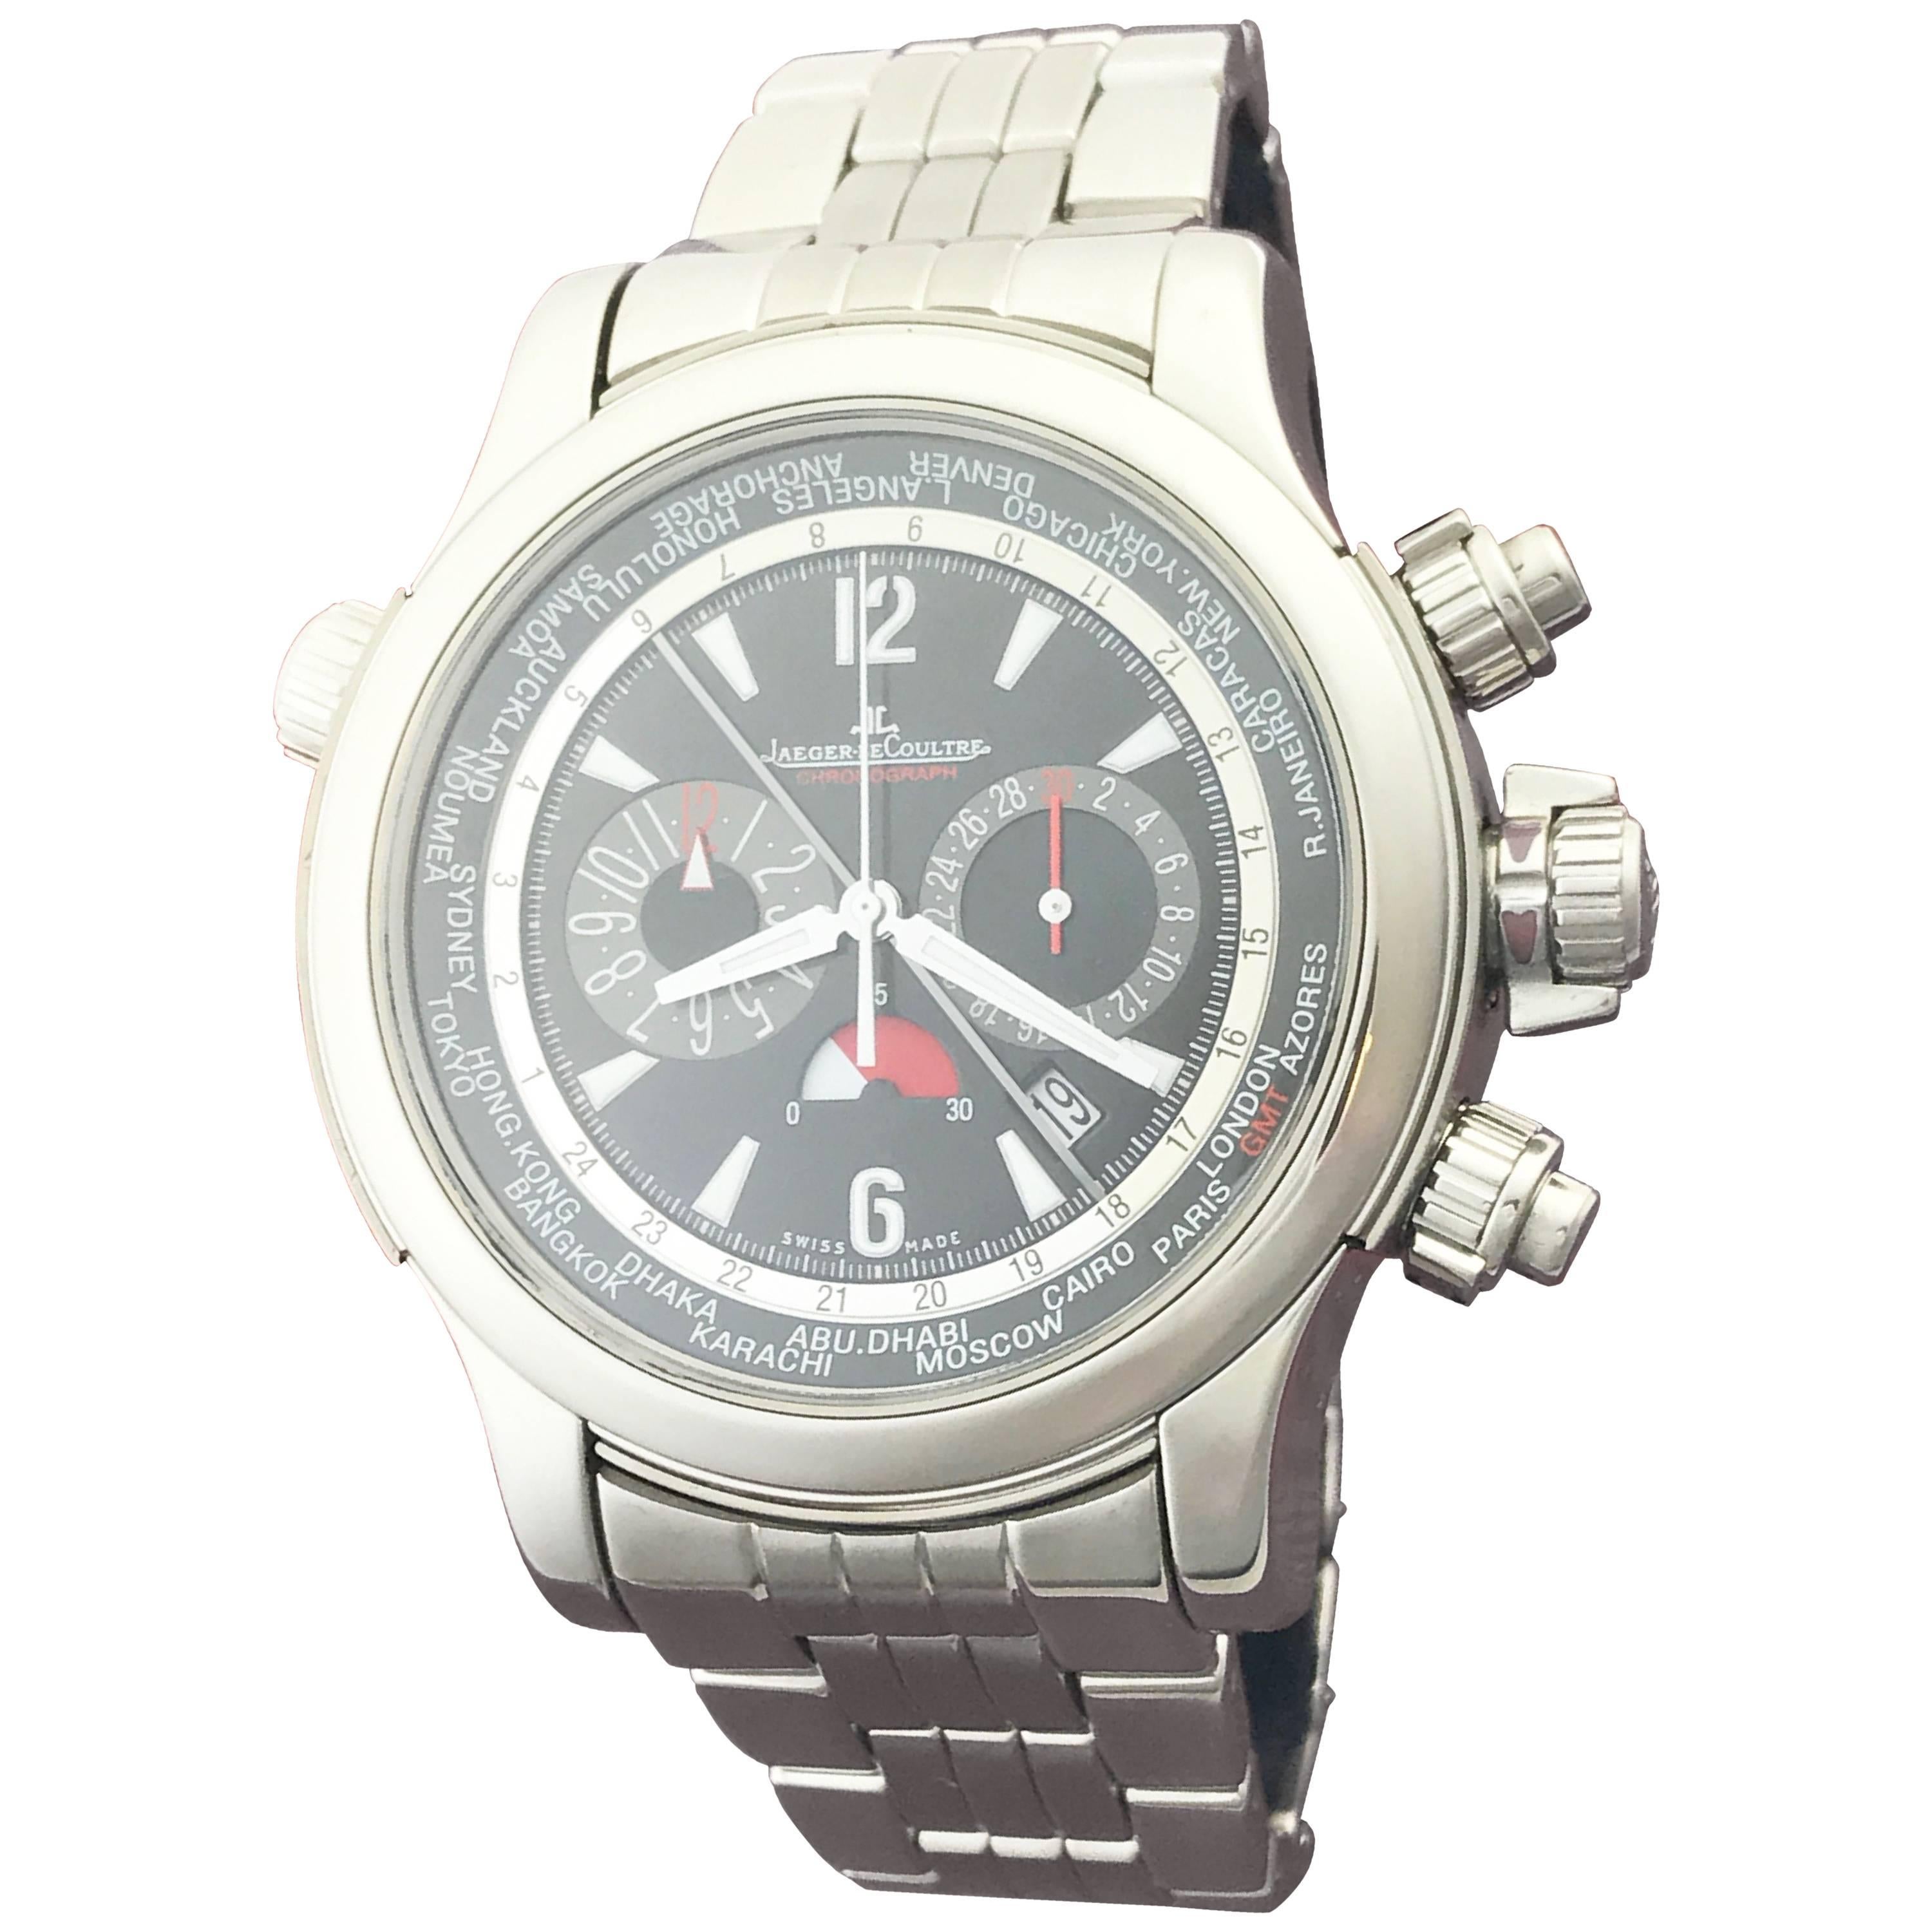 Jaeger LeCoultre Stainless Steel Master Compressor Automatic Wristwatch